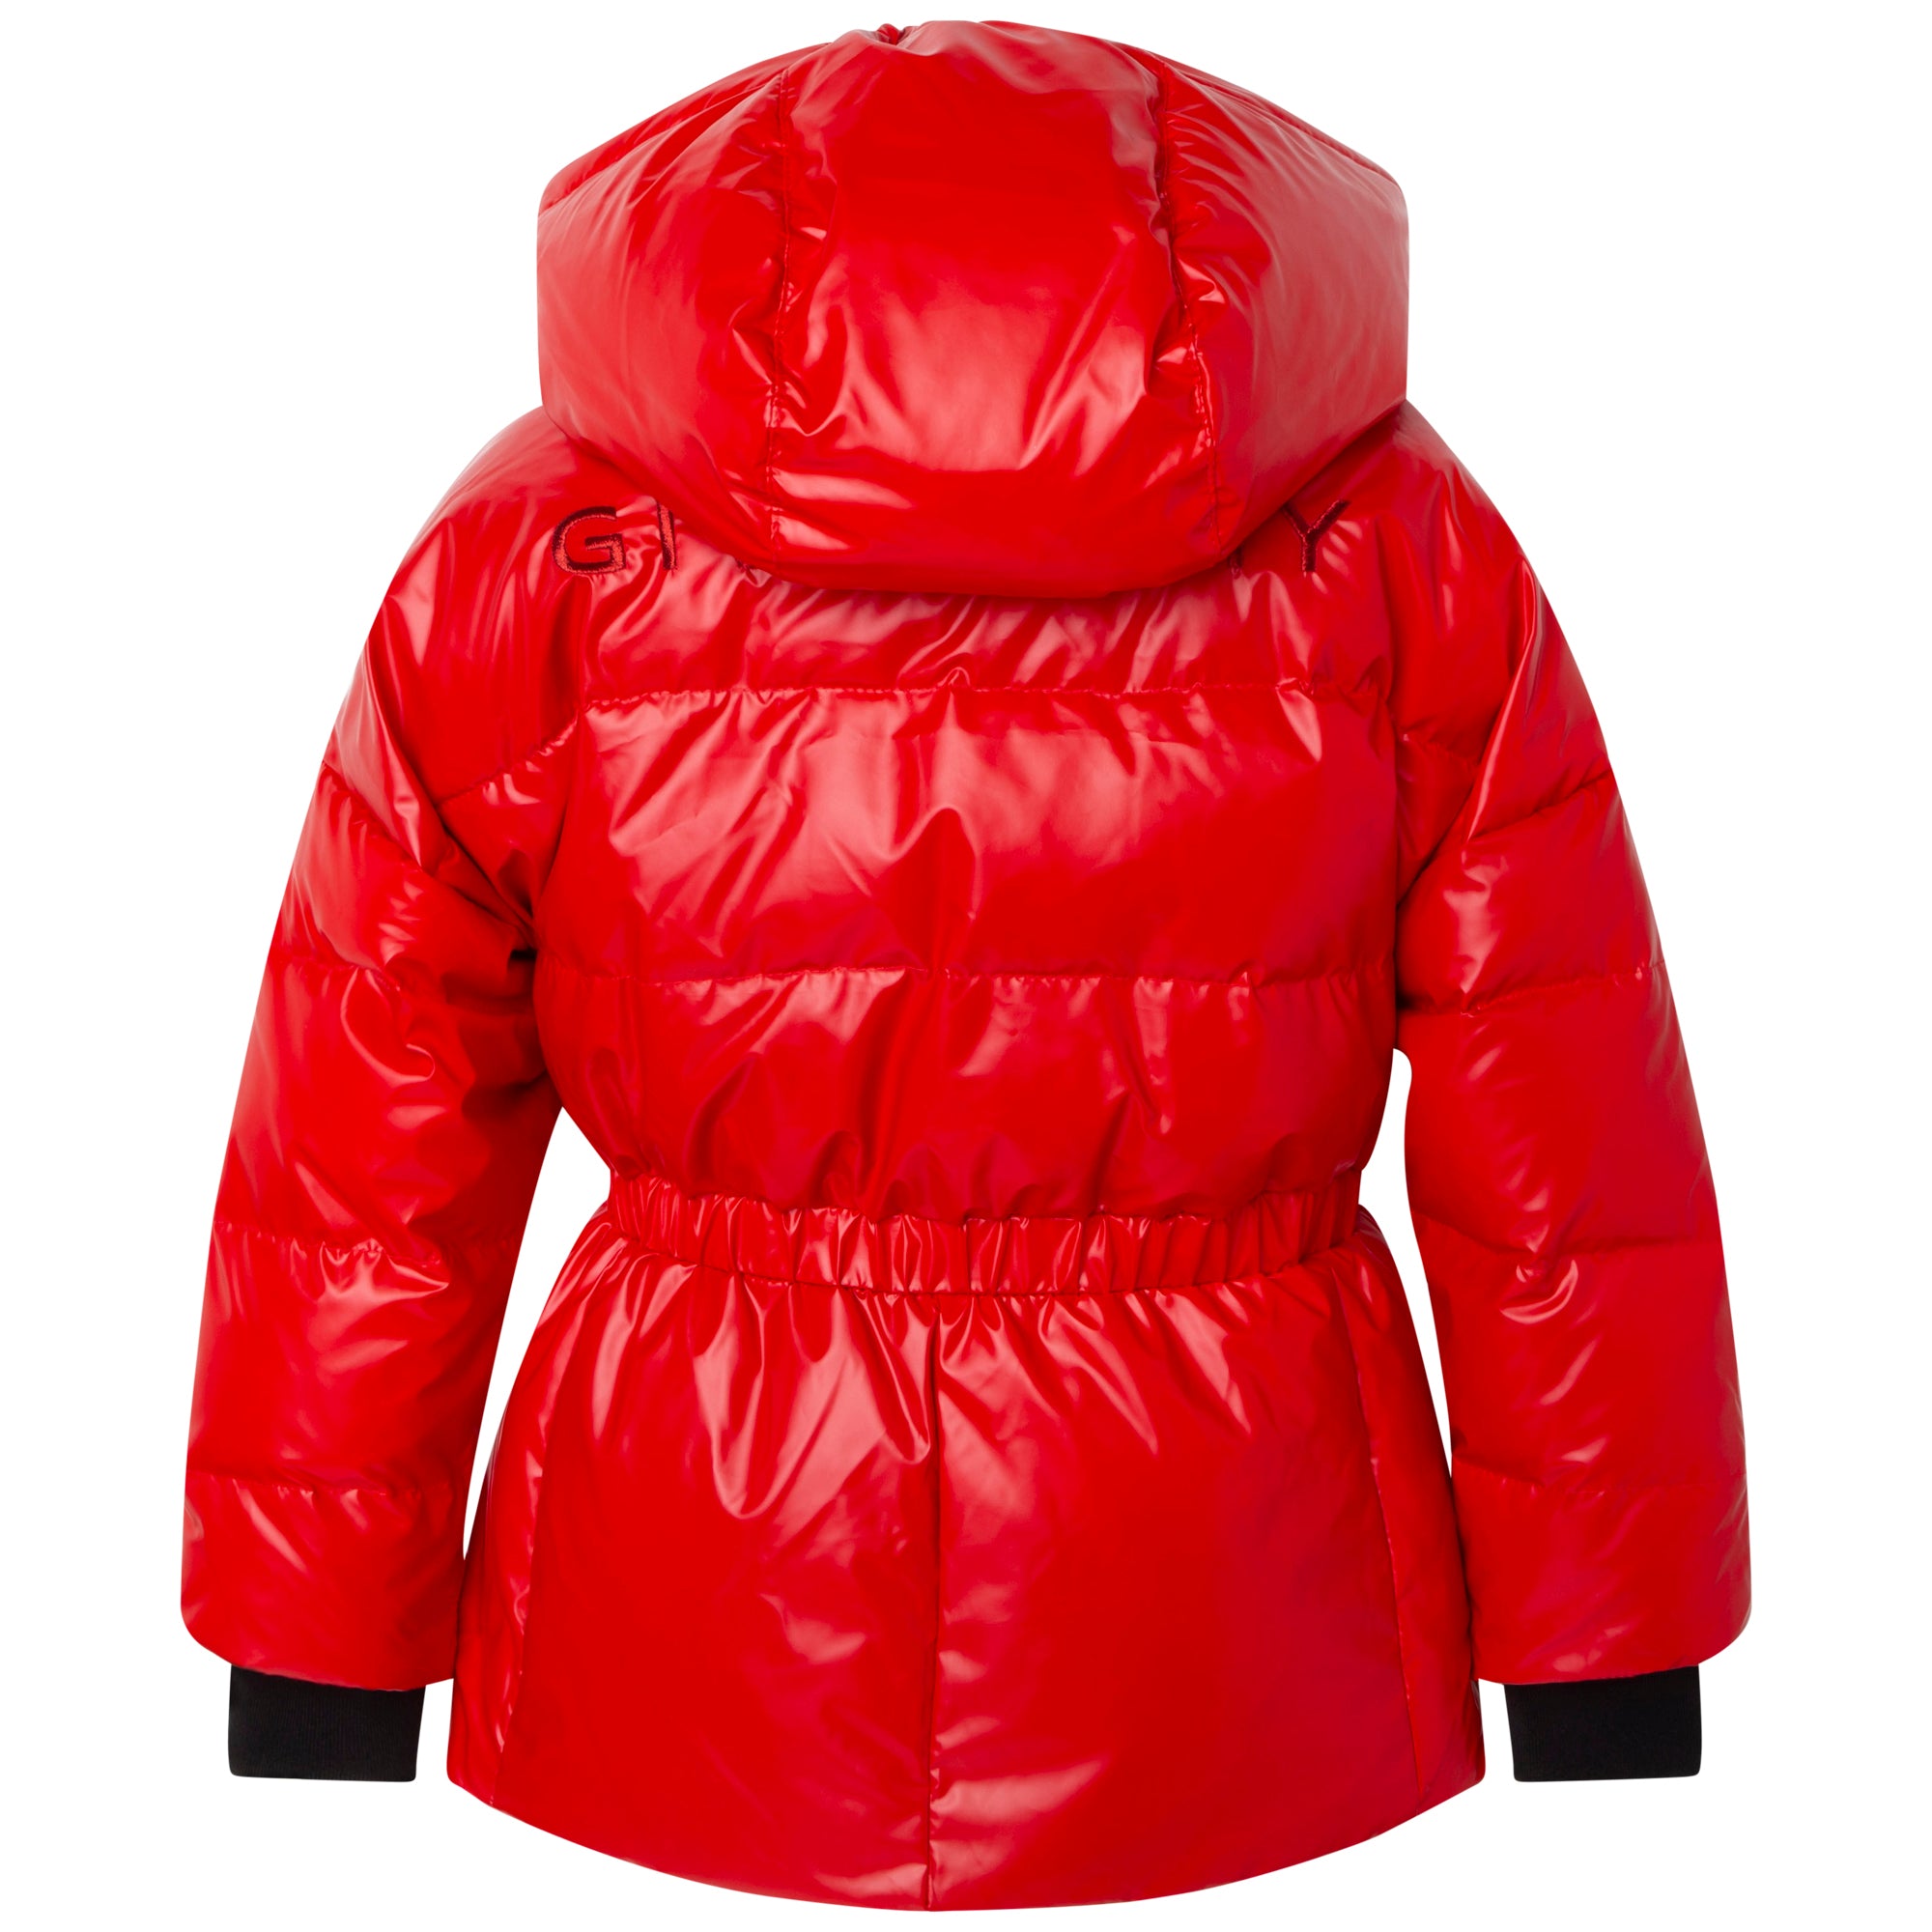 Givenchy Red Puffer Jacket